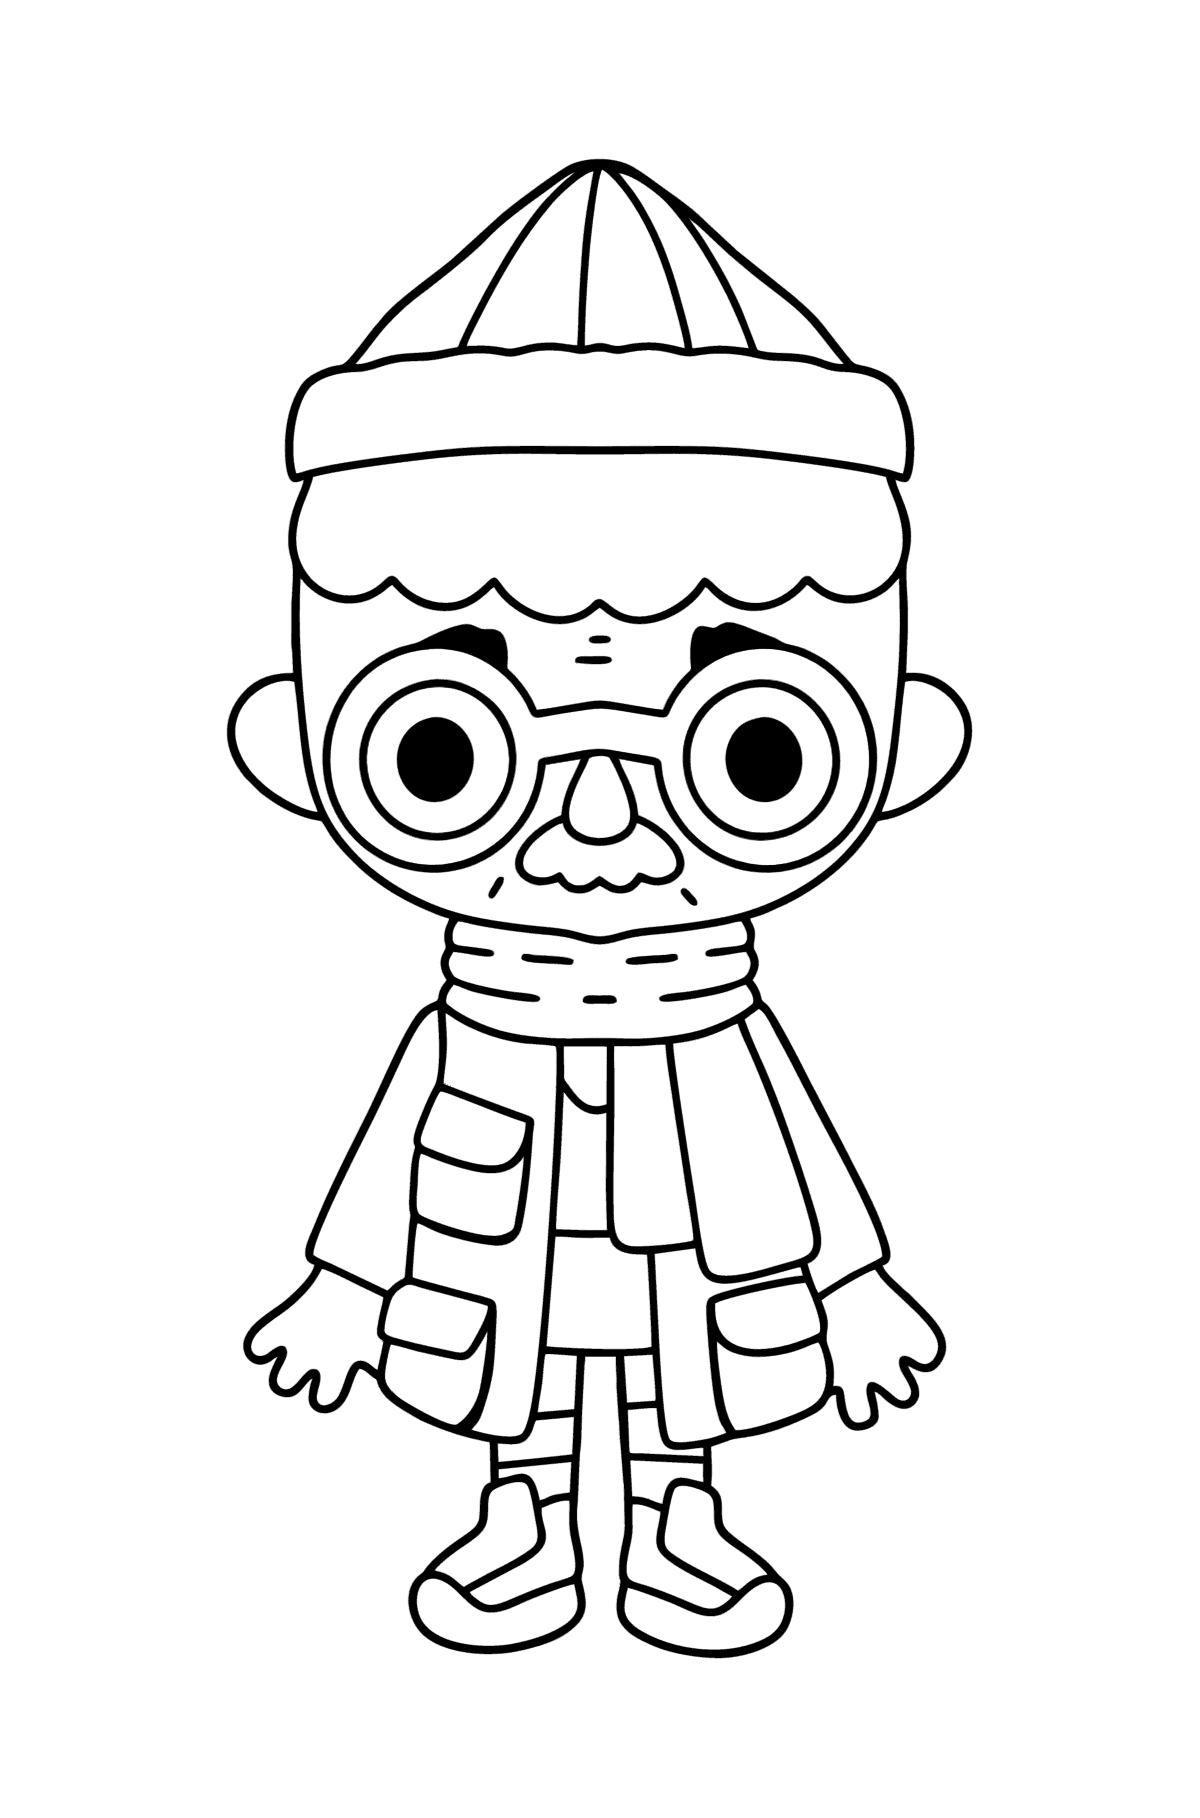 Coloring page Oldies tocaboca 03 - Coloring Pages for Kids